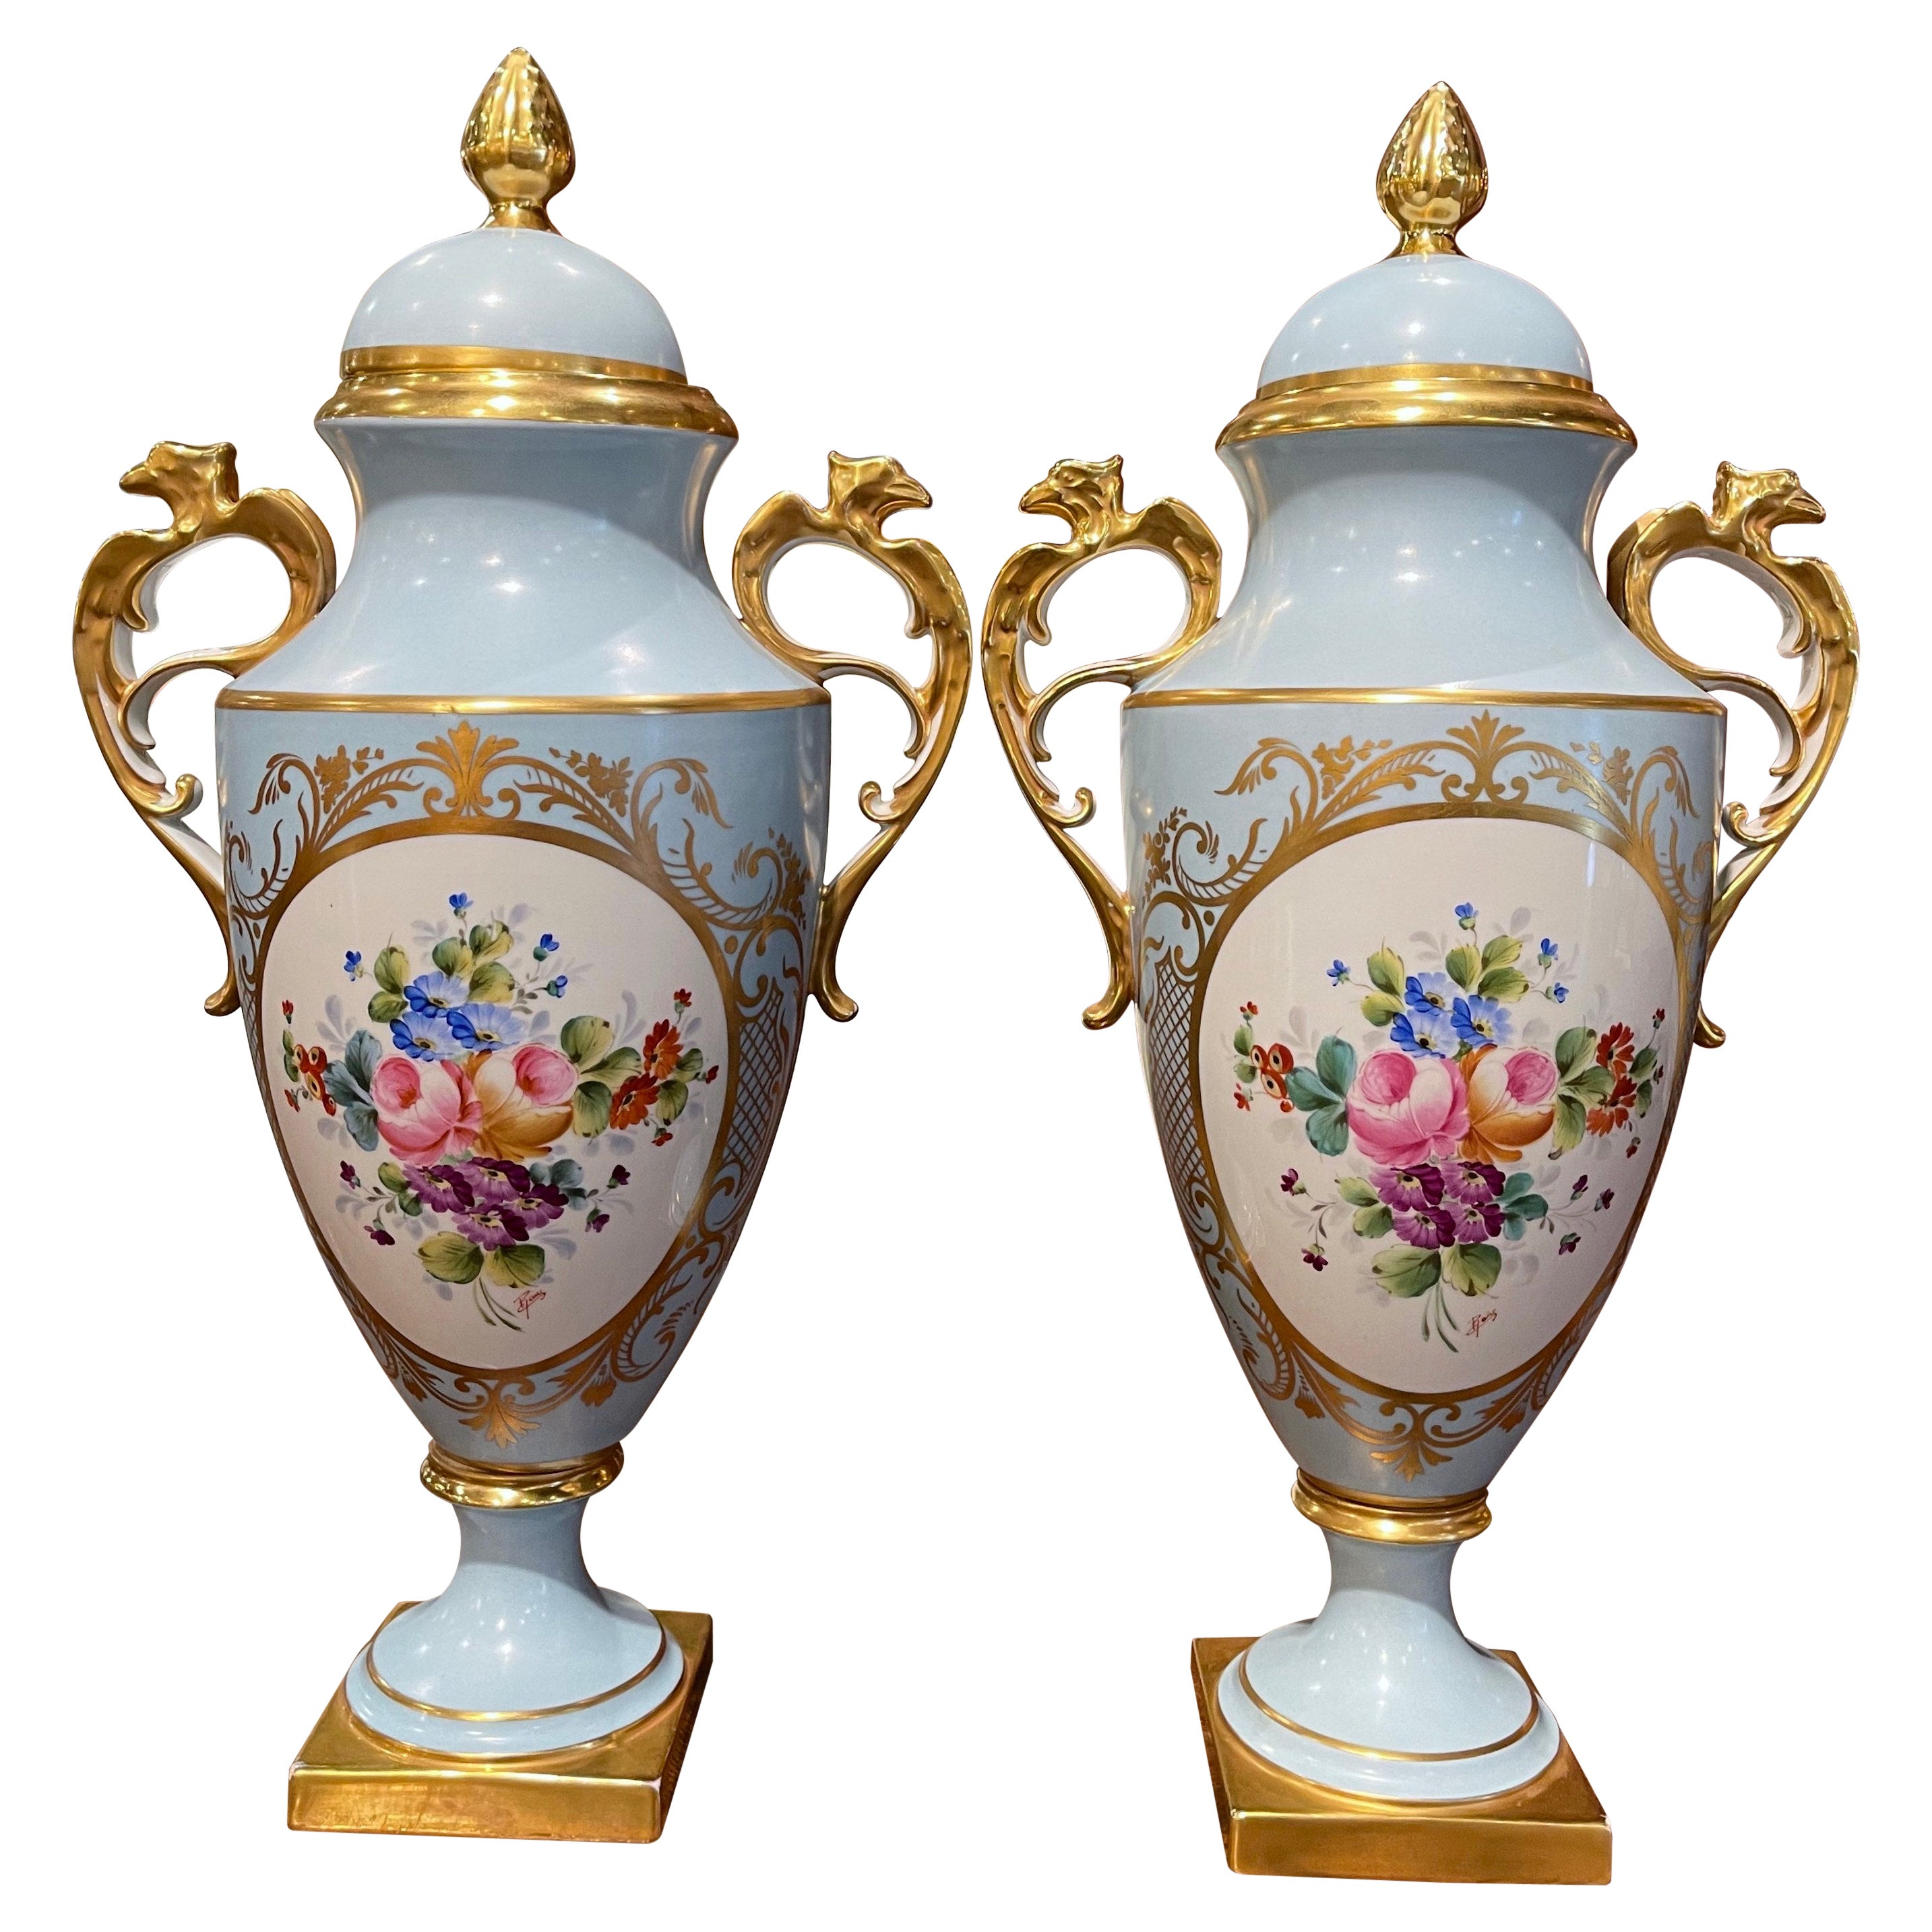 Pair of Mid-Century French Hand-Painted Porcelain Limoges Urns Signed Rene Caire